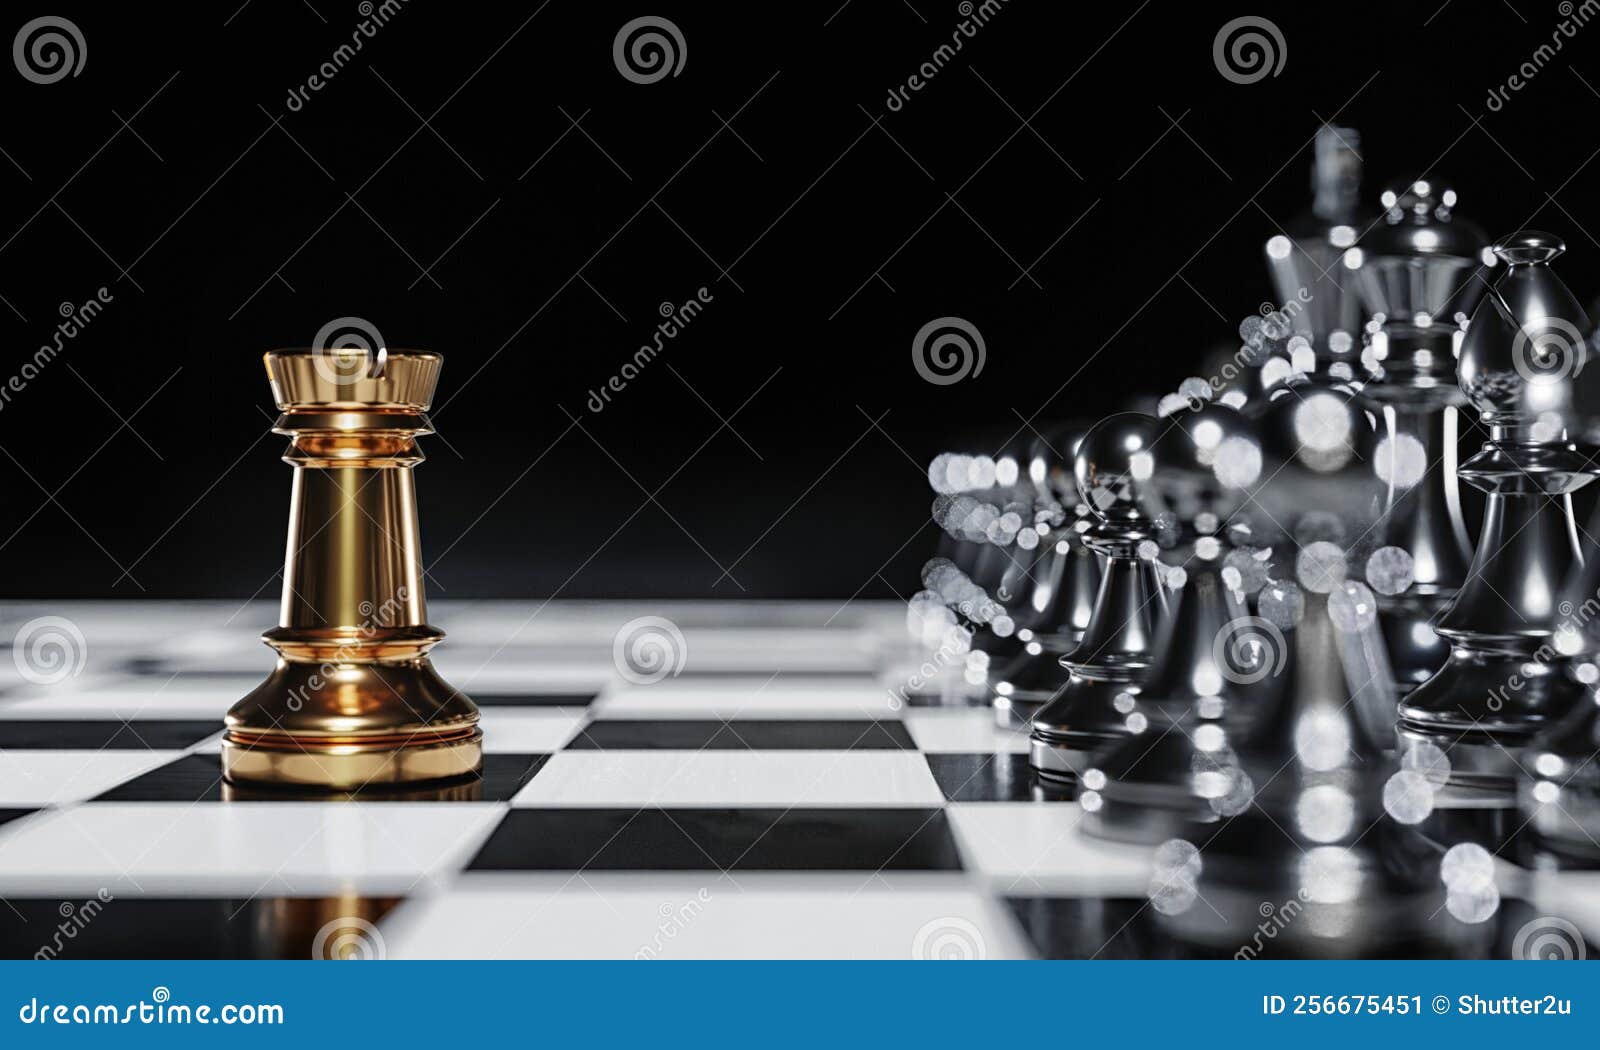 Download wallpapers 3d chess, silver metal chess, chessboard